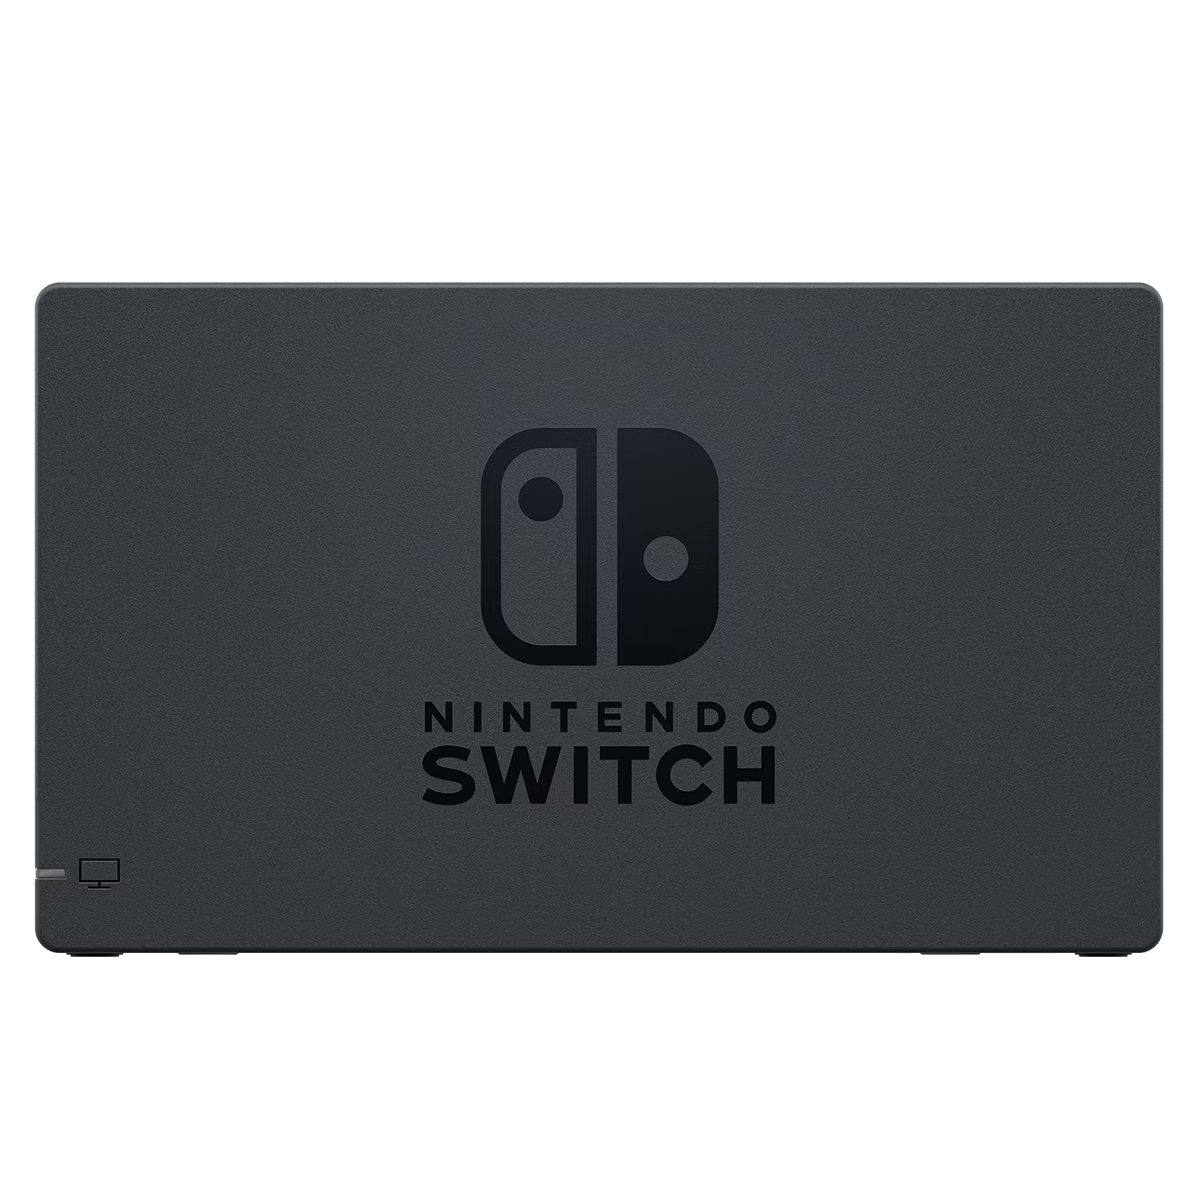 official nintendo switch docking station viewed from the front